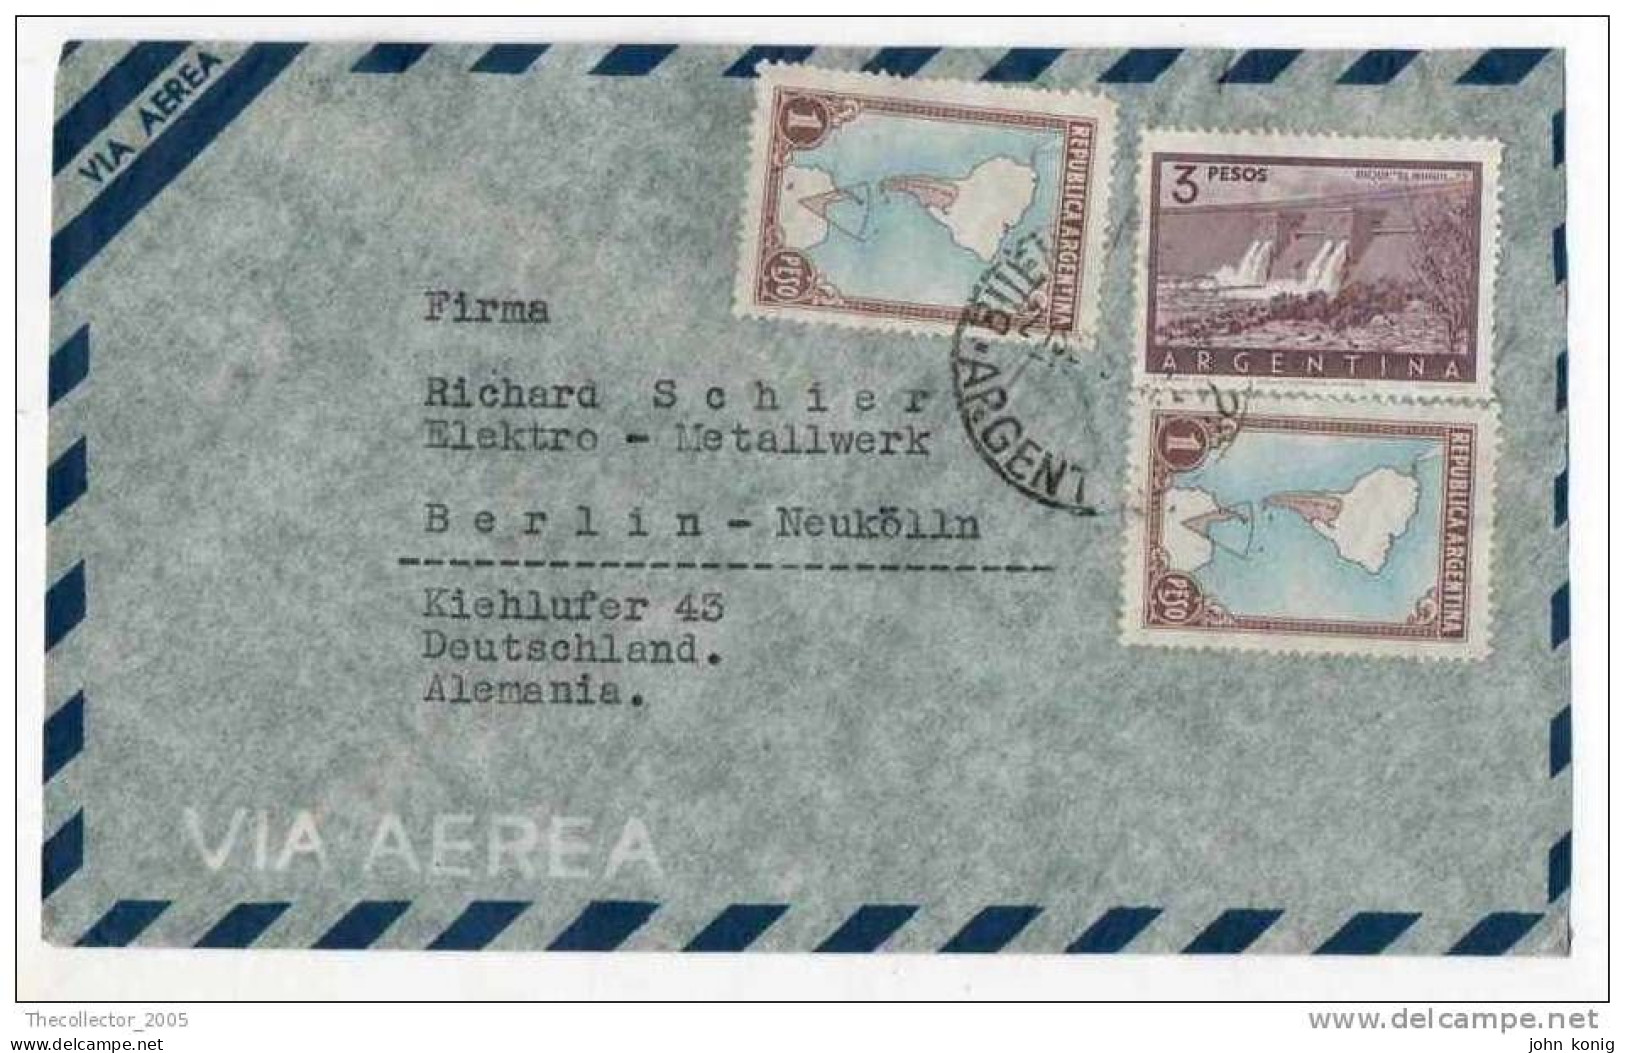 Lettera Busta Argentina-Argentinien Letter- Cover - Briefe- Posta Aerea Anni '50 (of '50s)-Air Mail-to Germany-Berlin - Poste Aérienne